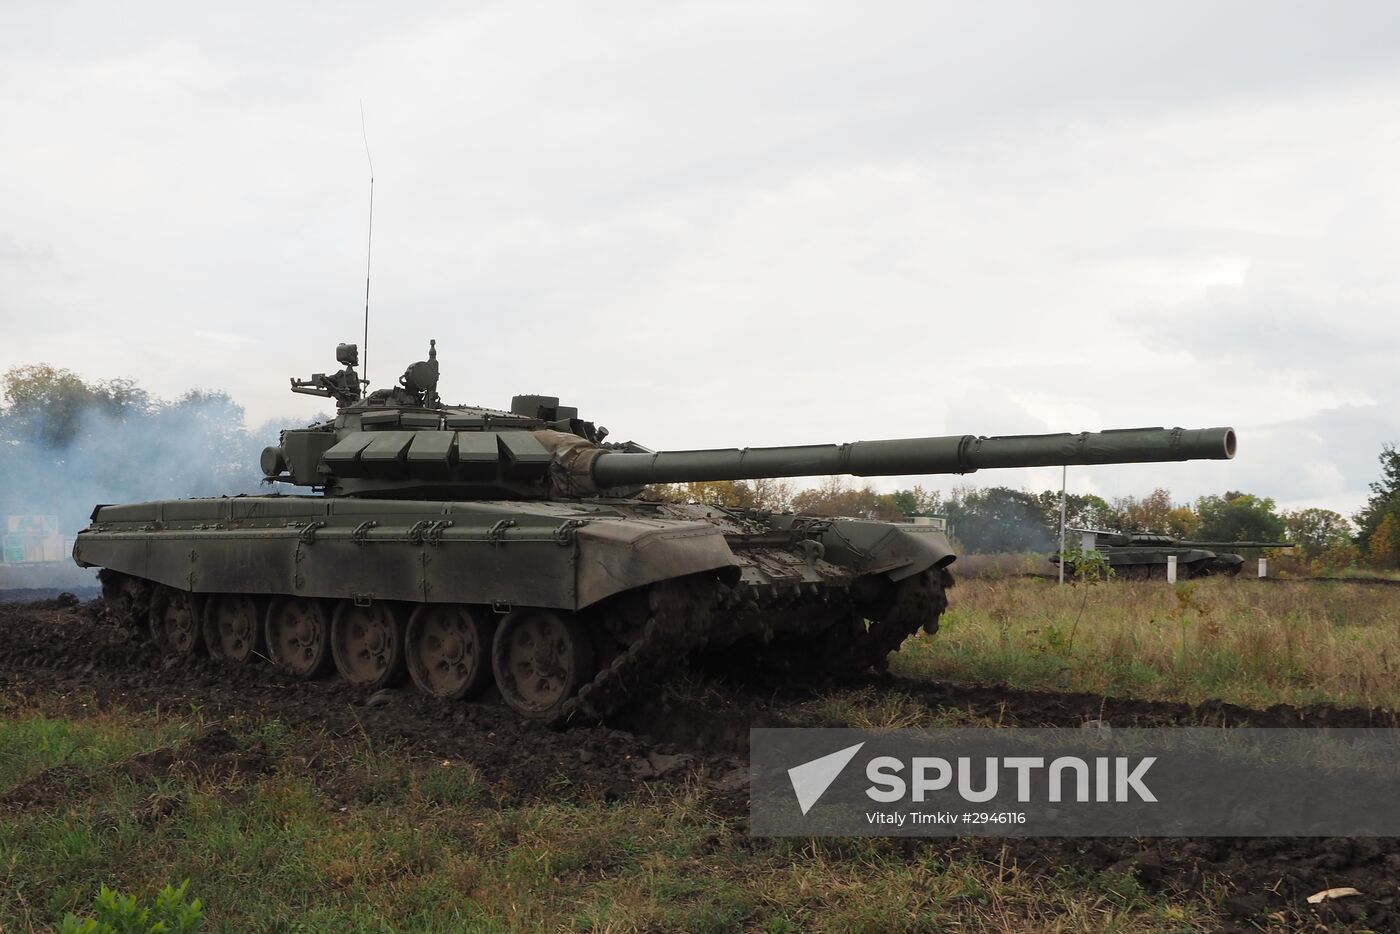 Exercises of tank units of a motorized-rifle infantry unit of the Russian South Military District